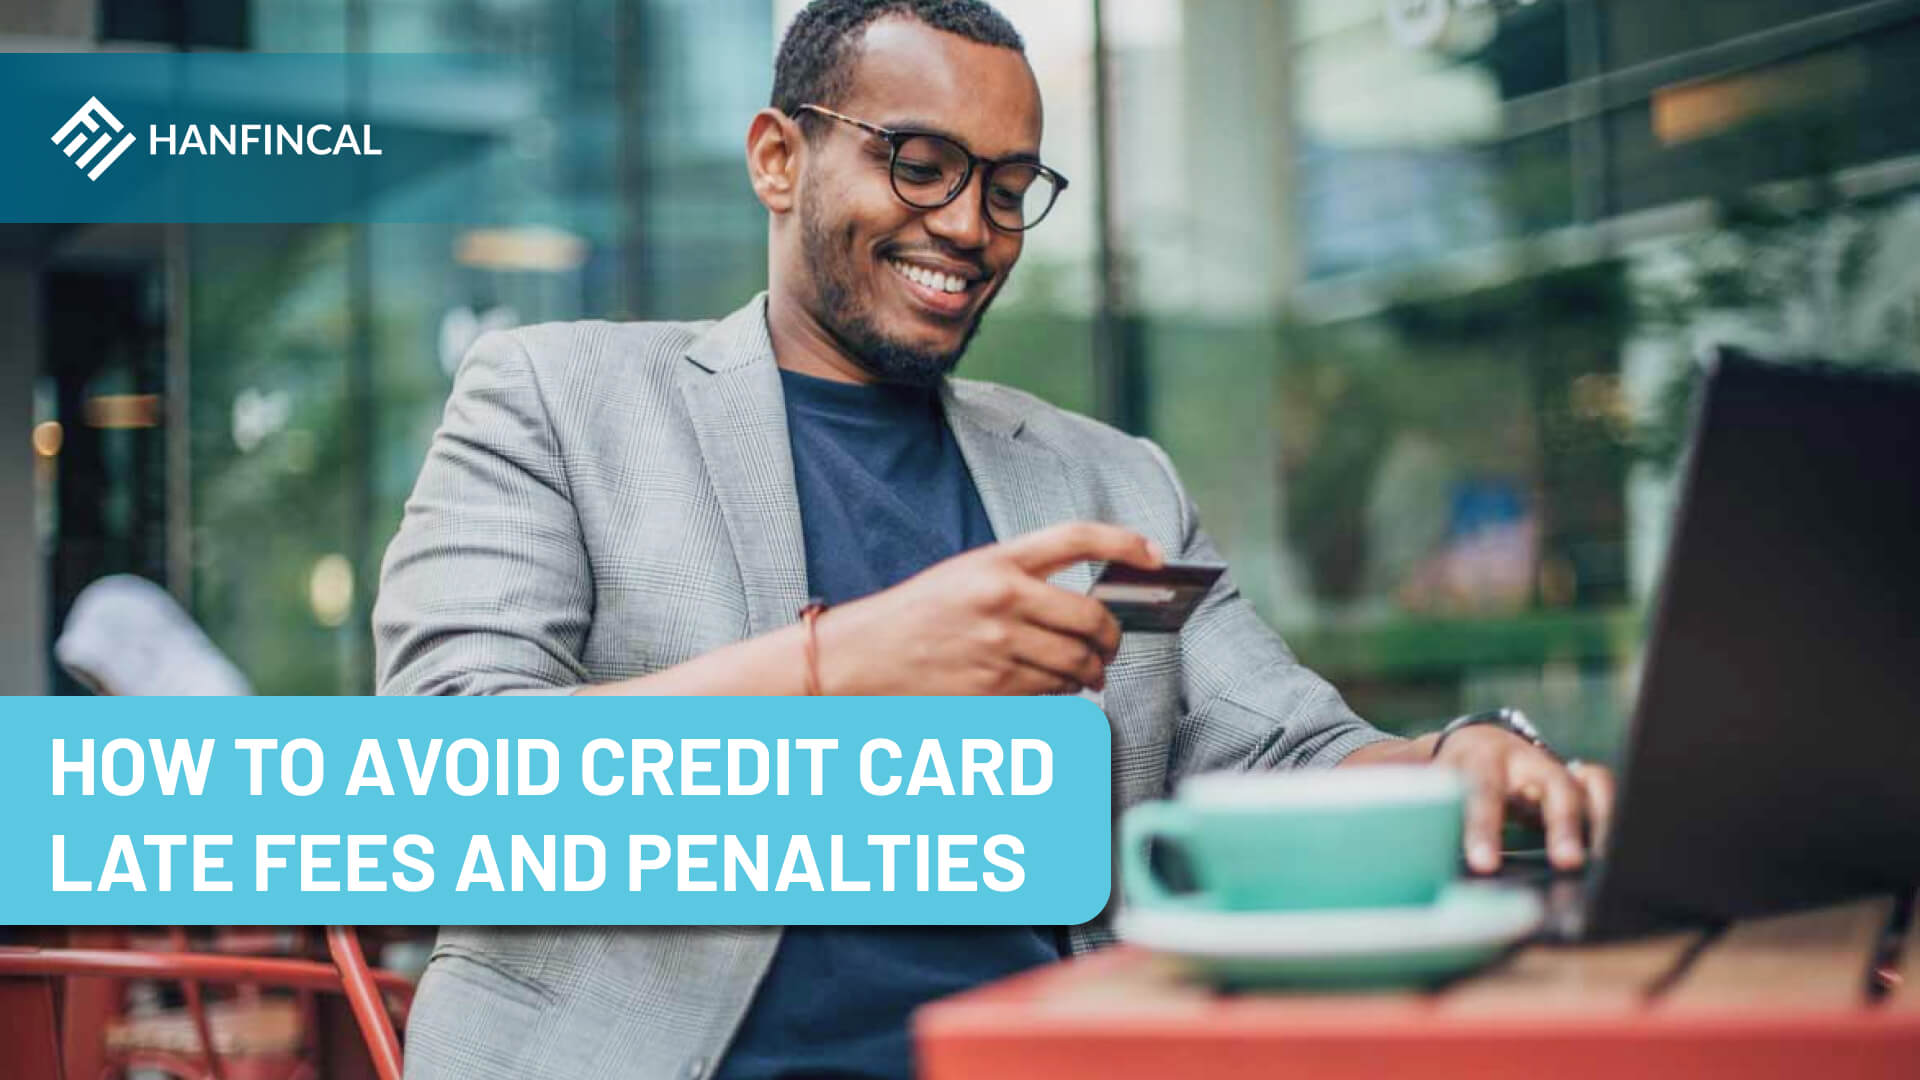 How to avoid credit card late fees and penalties?